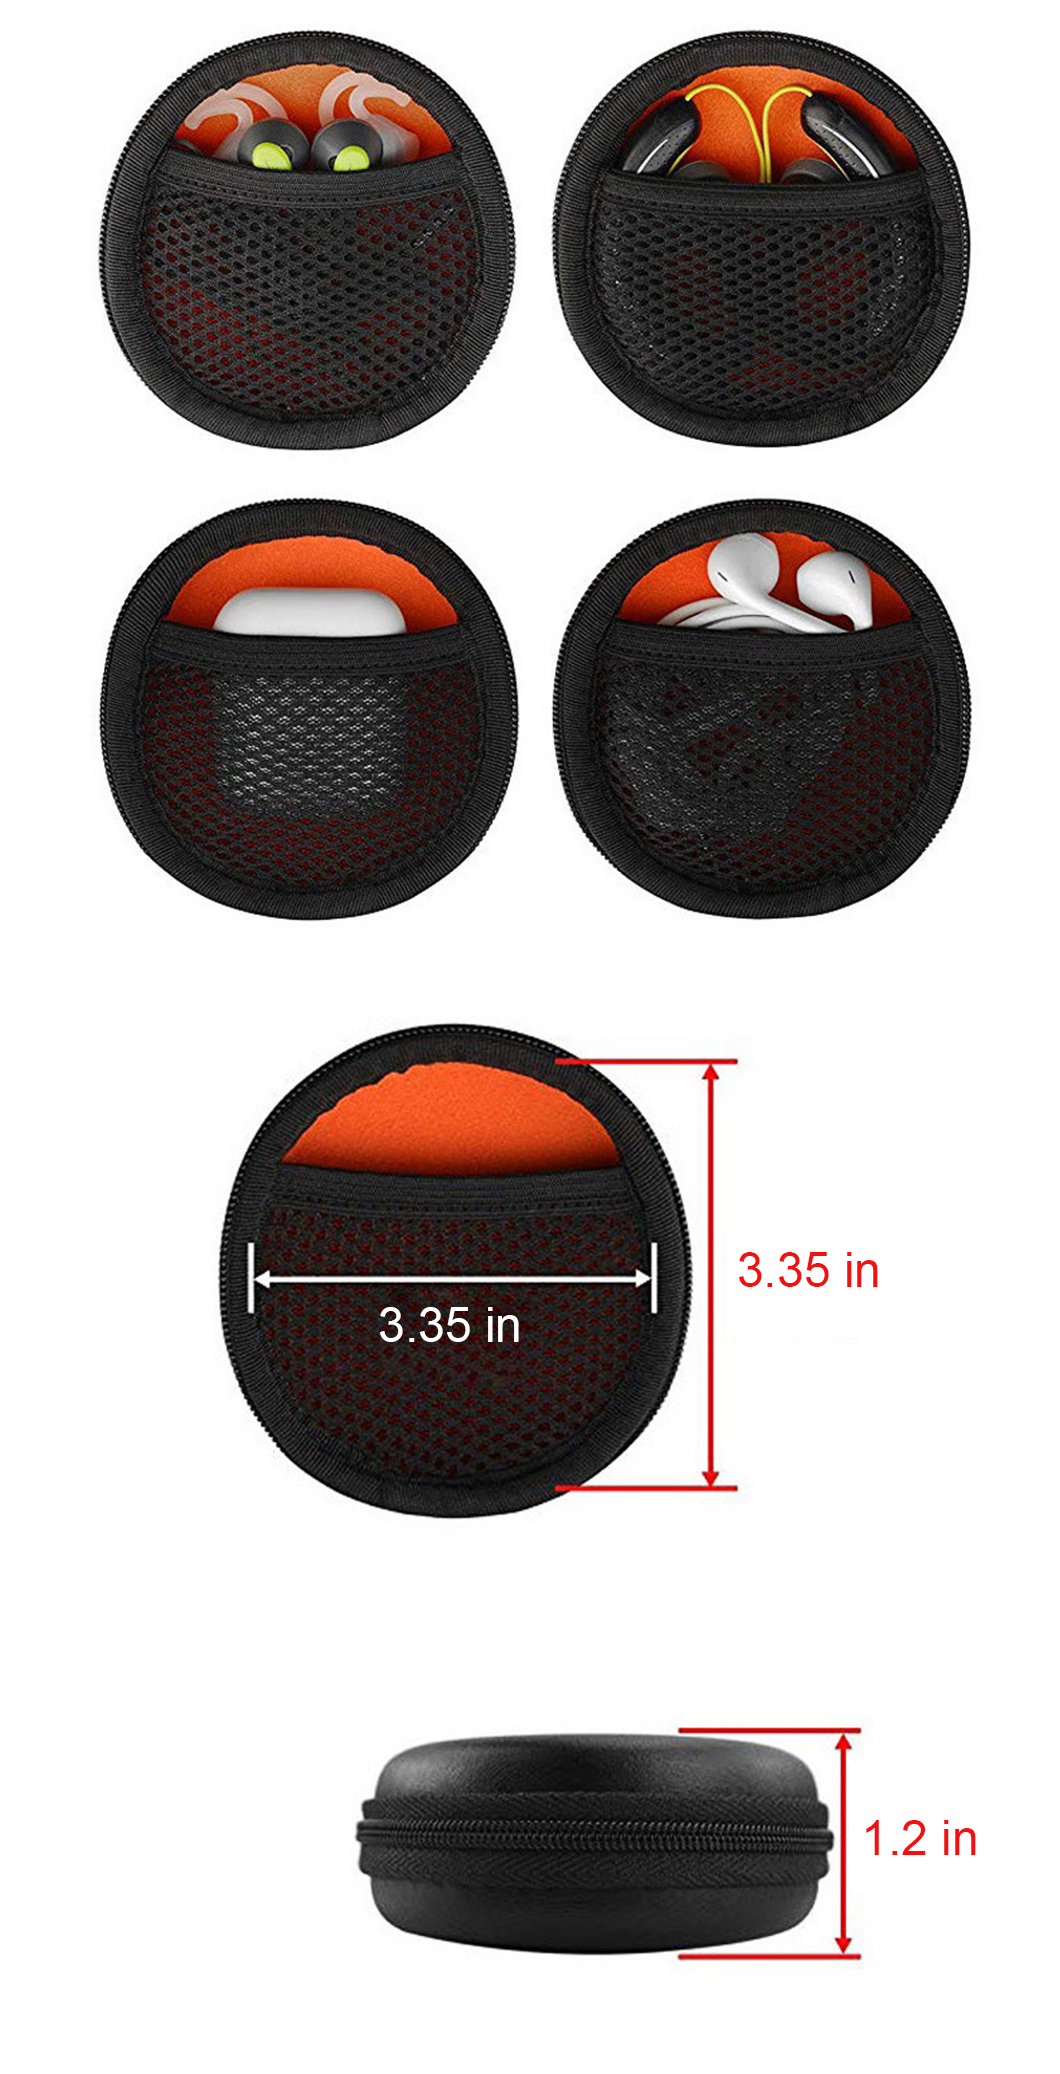 Portable EVA Hard Protective Carrying Case for Earphones, Fidget Spinner or Mini Parts(图3)